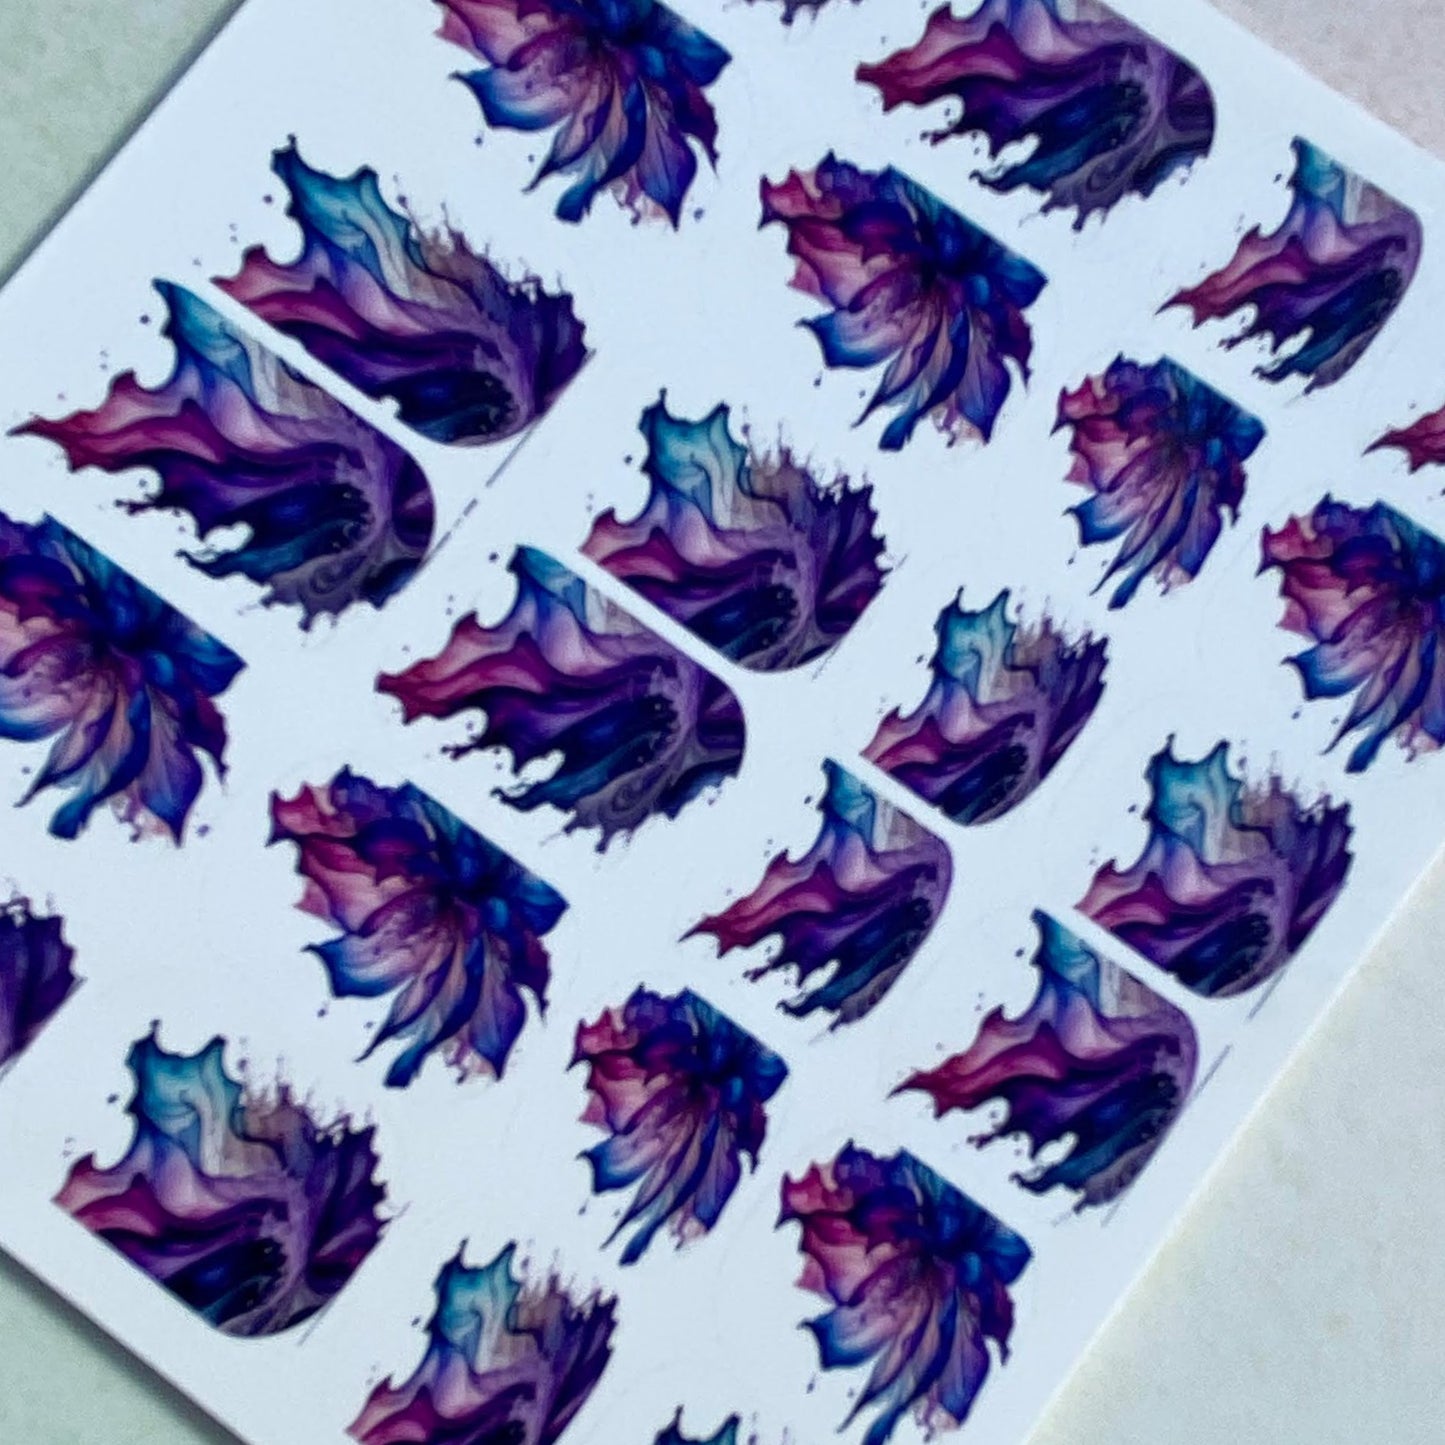 Floral Alcohol Ink Nail Art - Purple Ripples